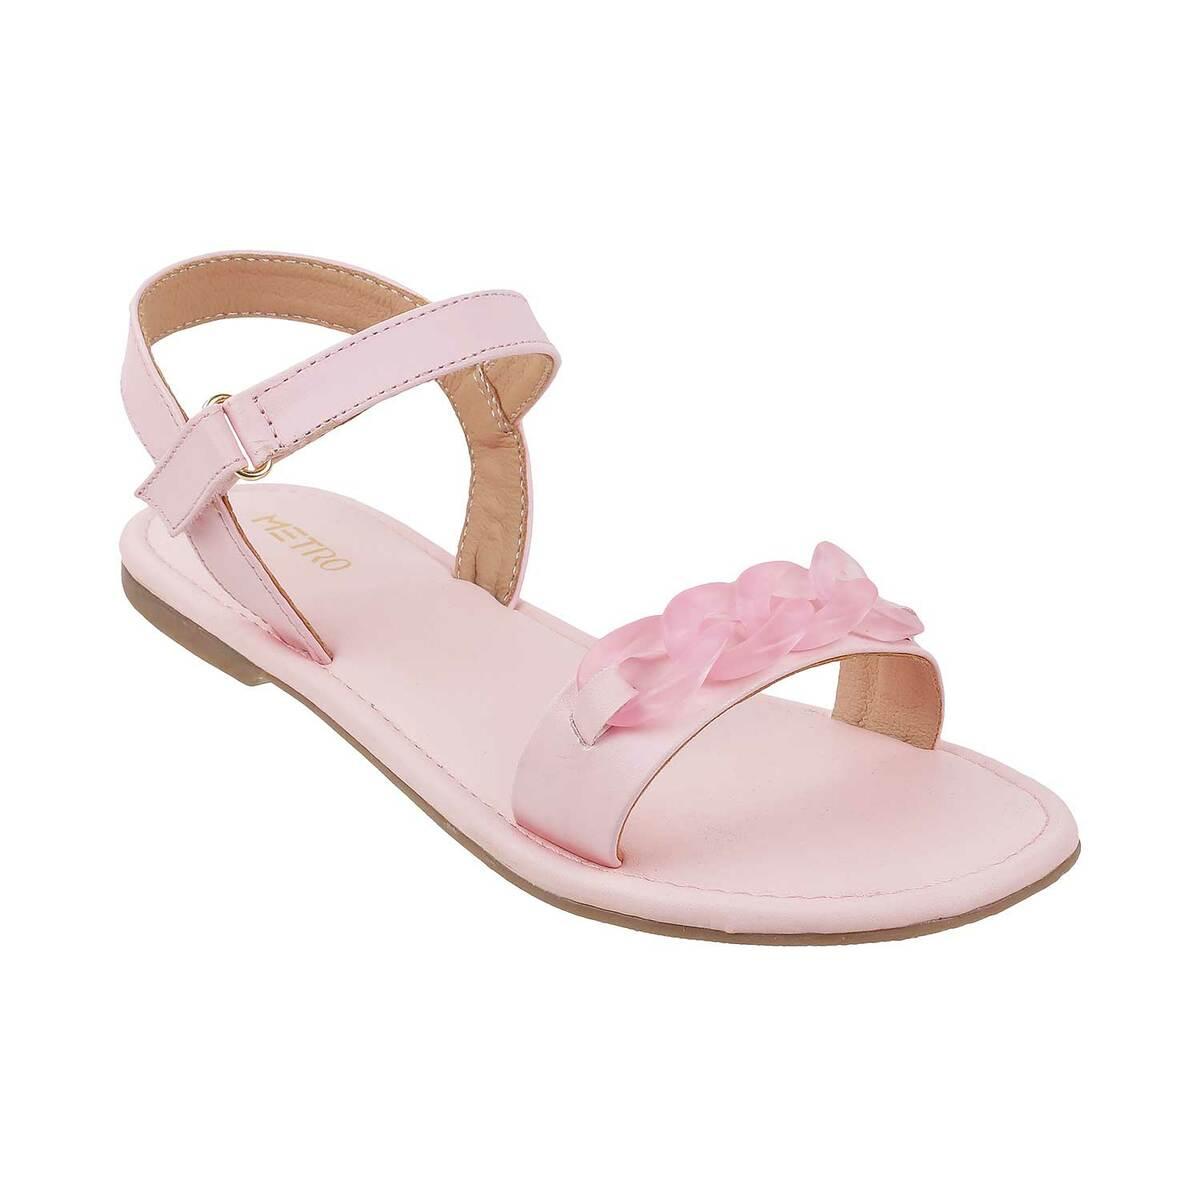 Three Colors Kids Roman Shoes Girls Fashion Casual Sandals